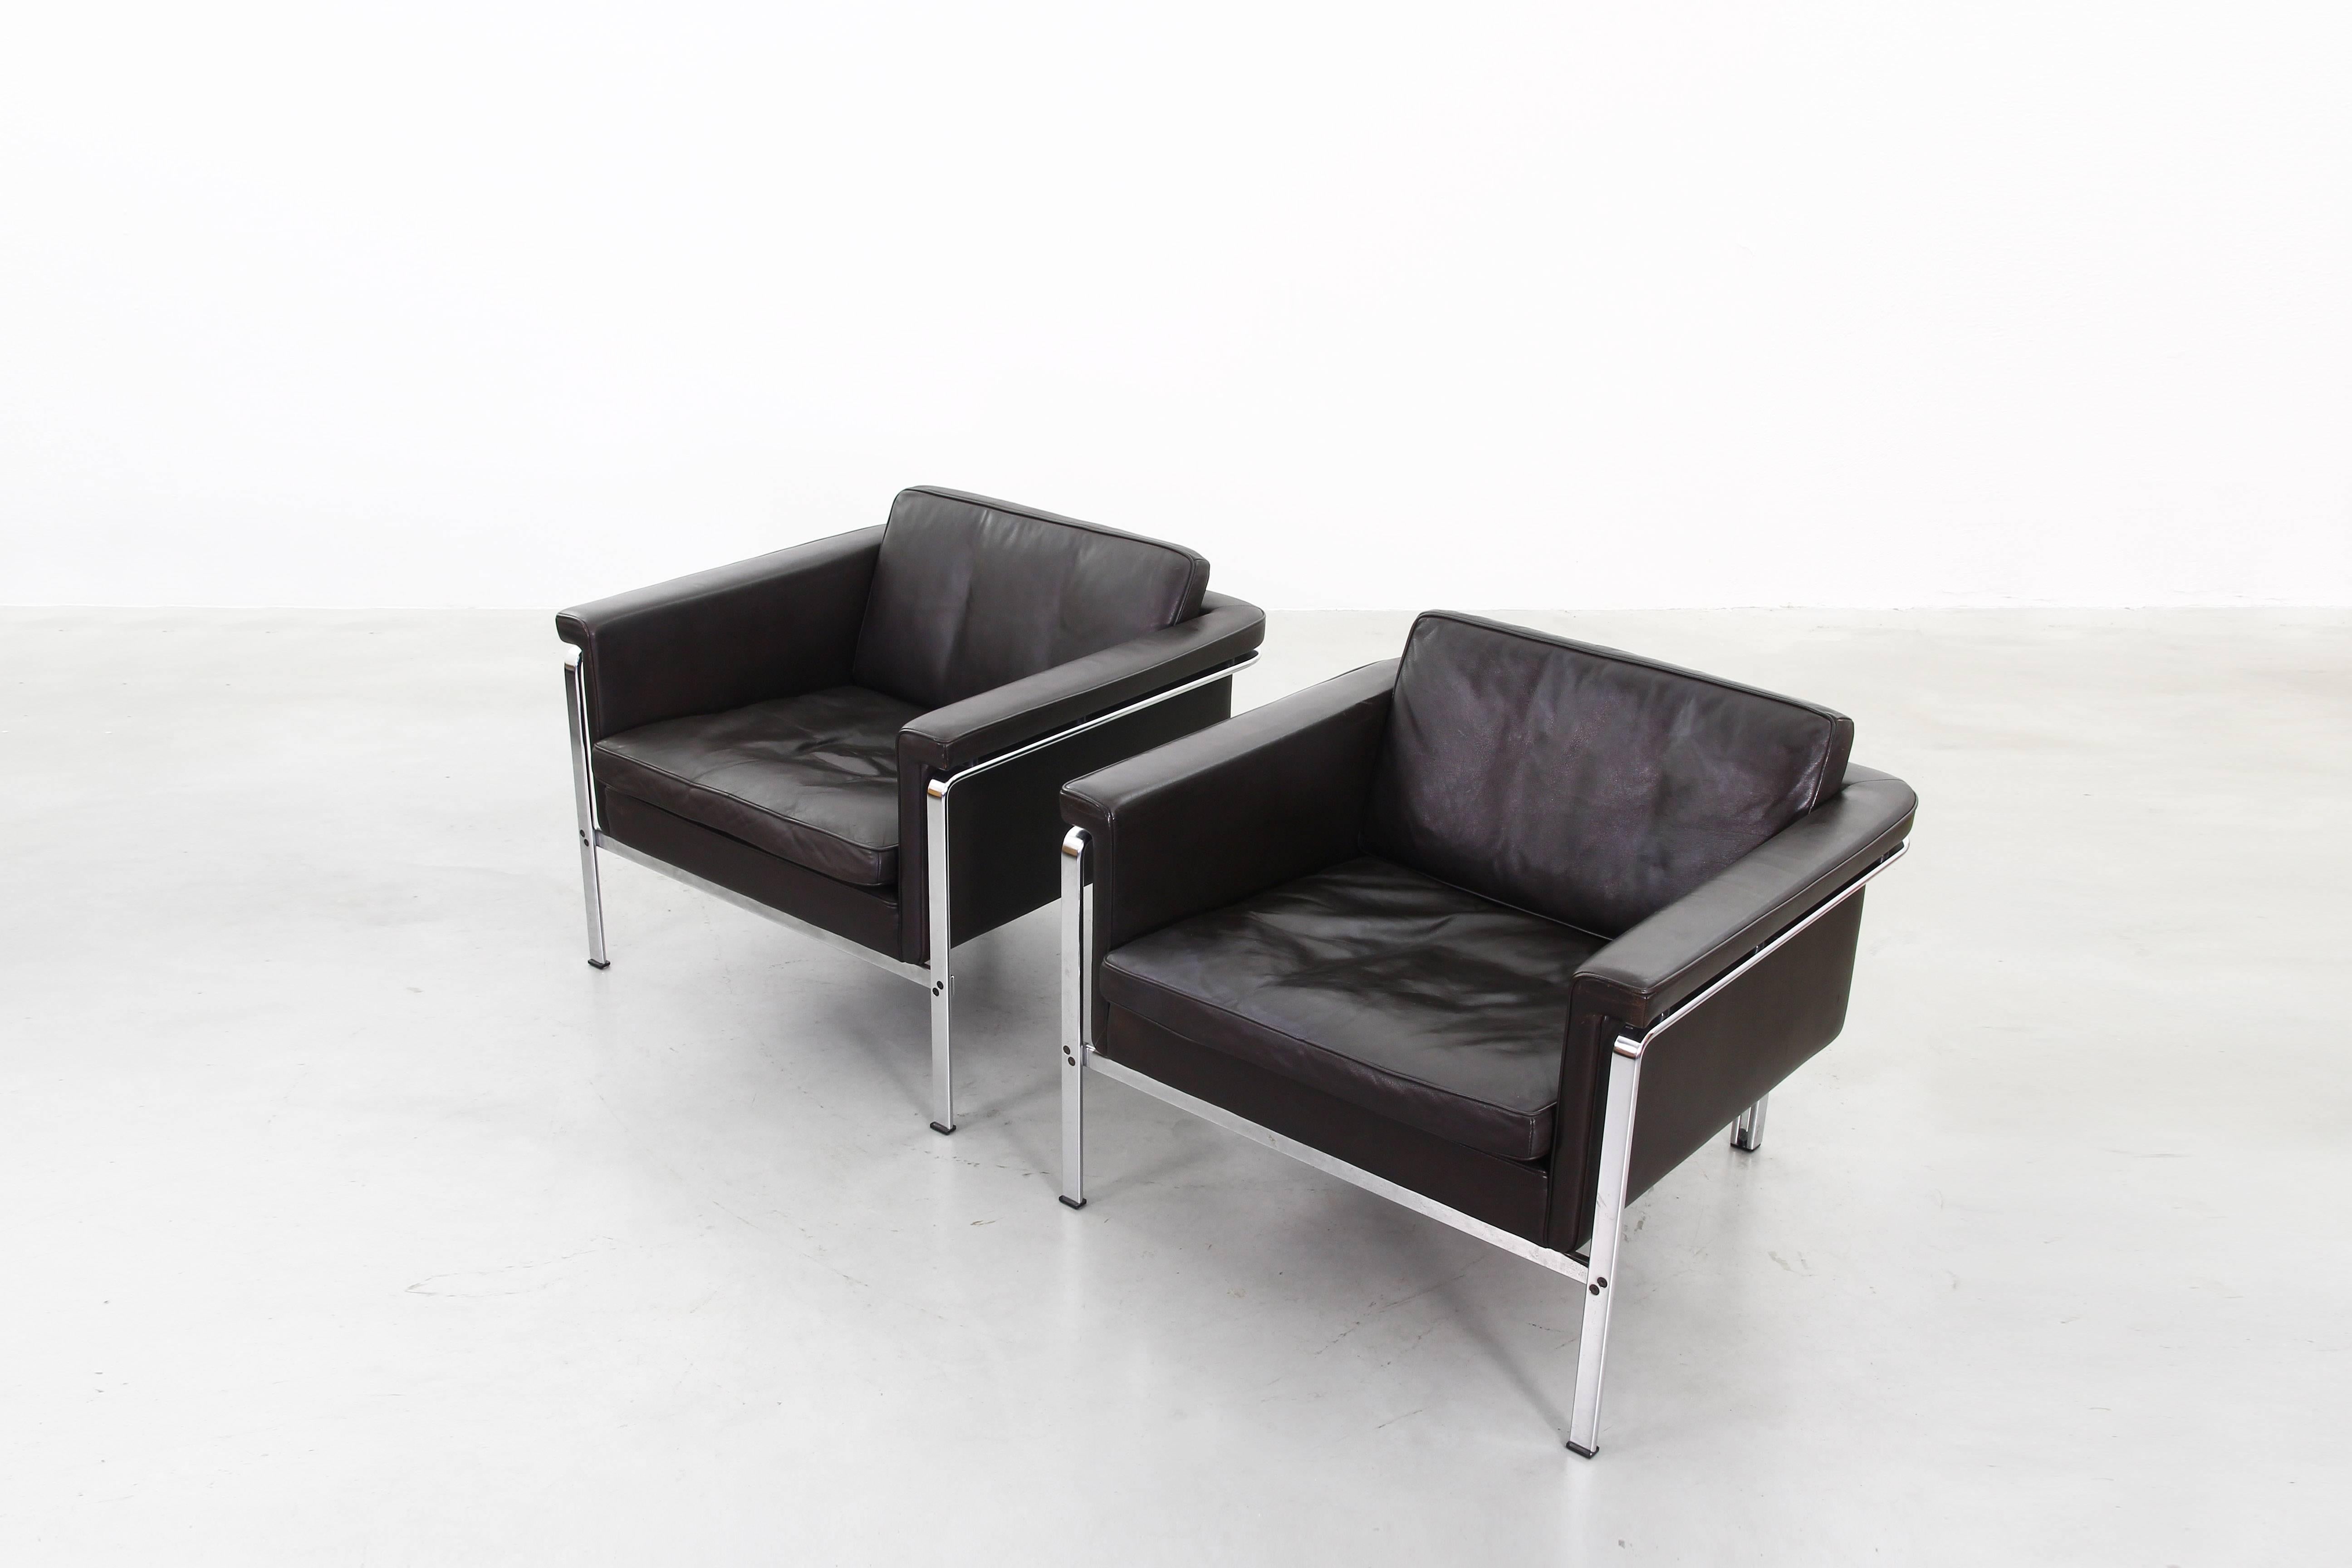 Steel Beautiful Pair of Lounge Chairs by Horst Bruning for Alfred Kill International